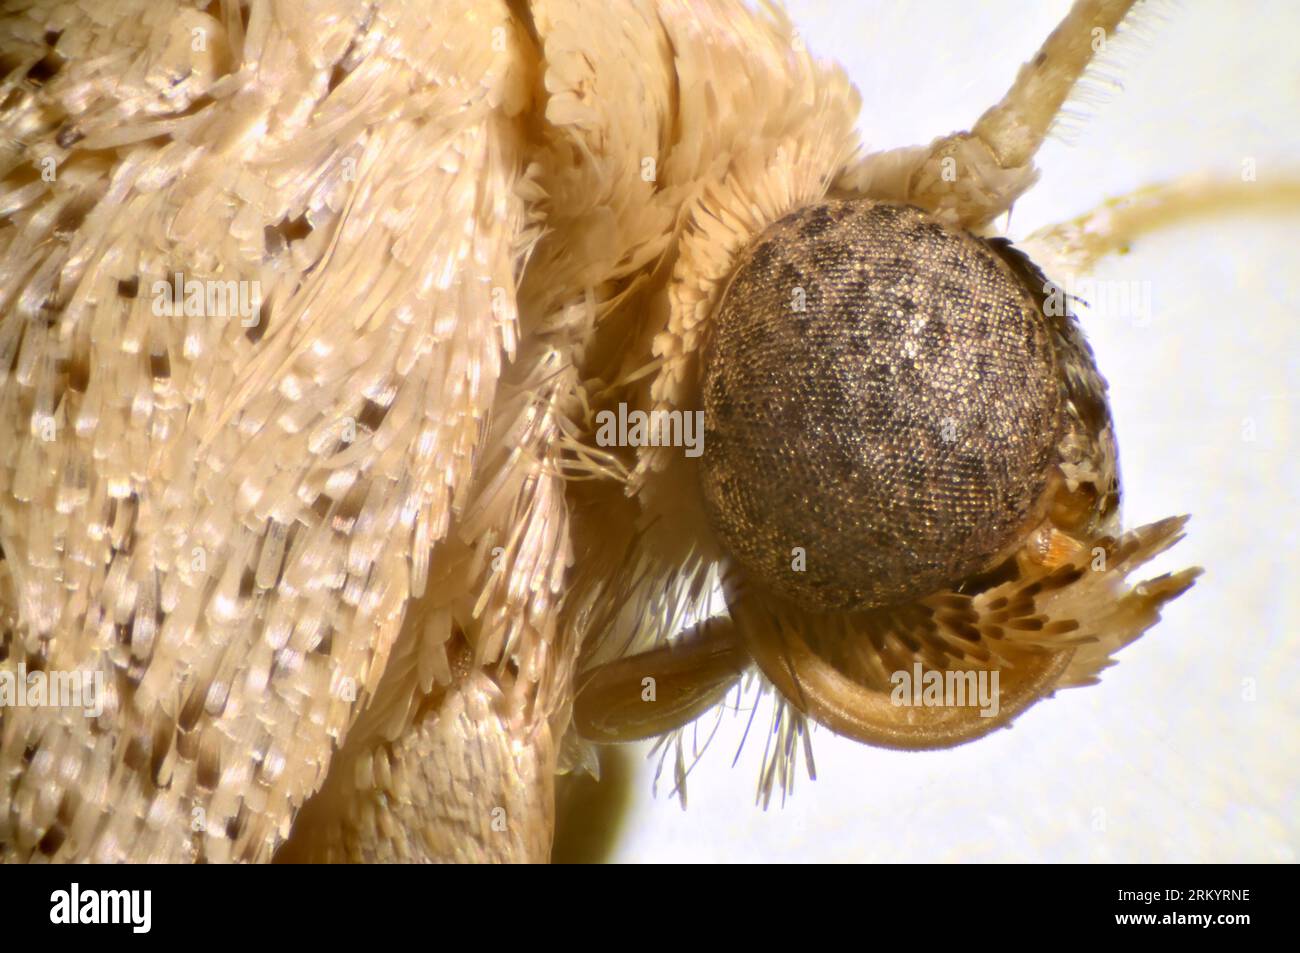 Microscope image of head of a micro moth showing its compound eyes and the feathery scales on the wing Stock Photo